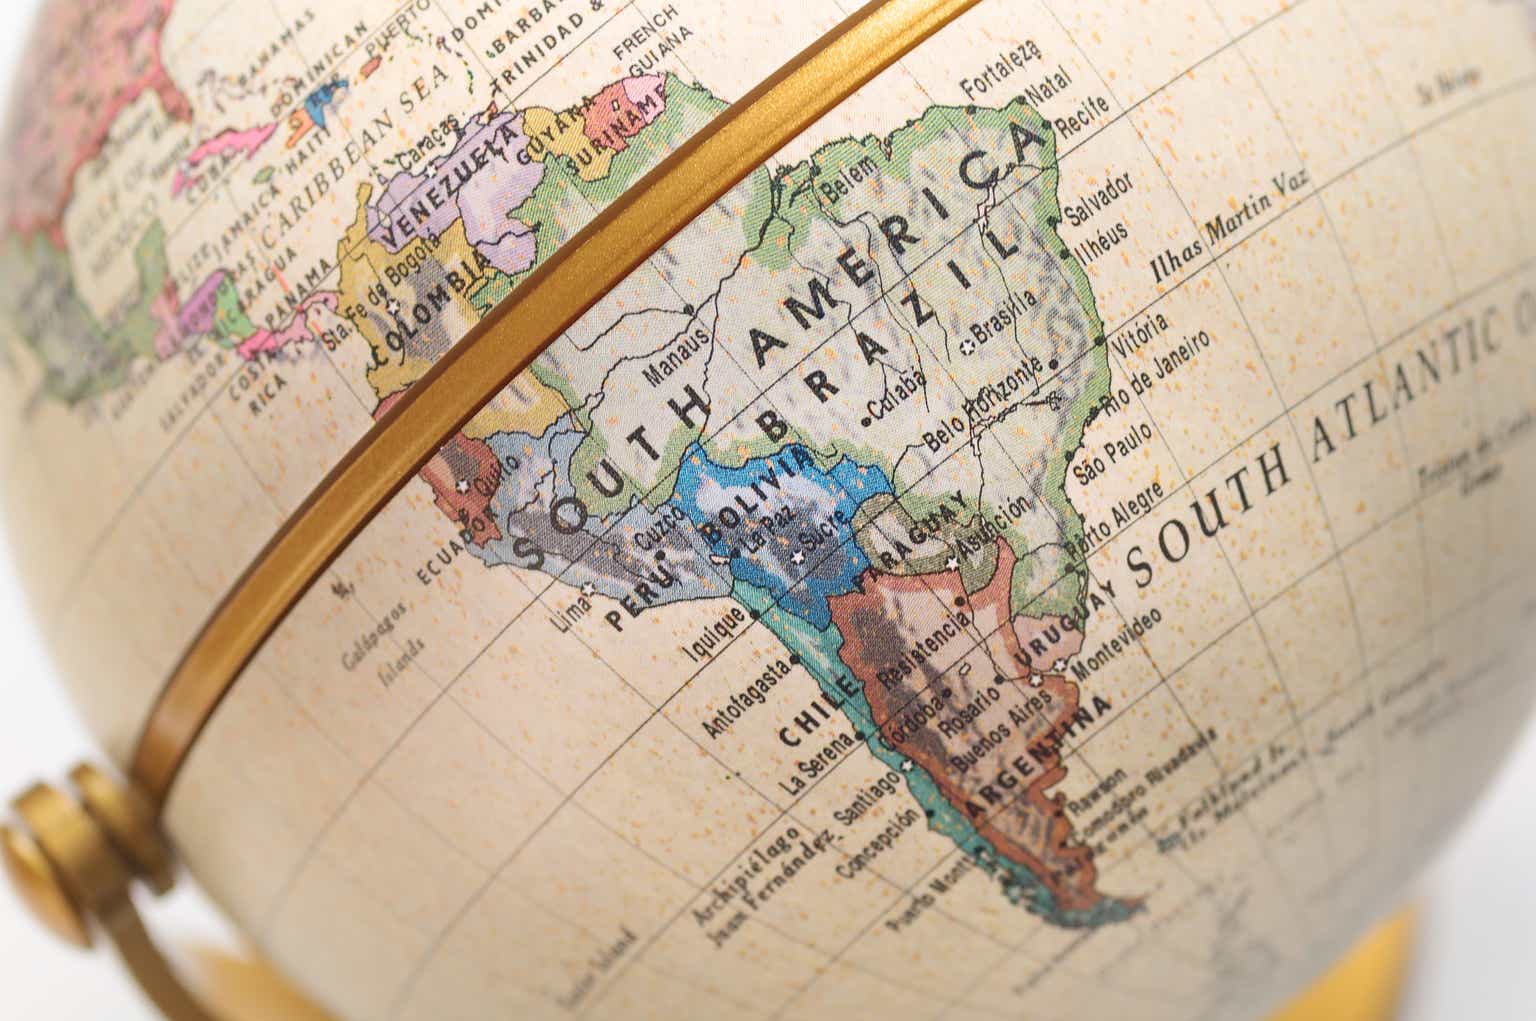 MercadoLibre: Regional Expansion, Future Projections